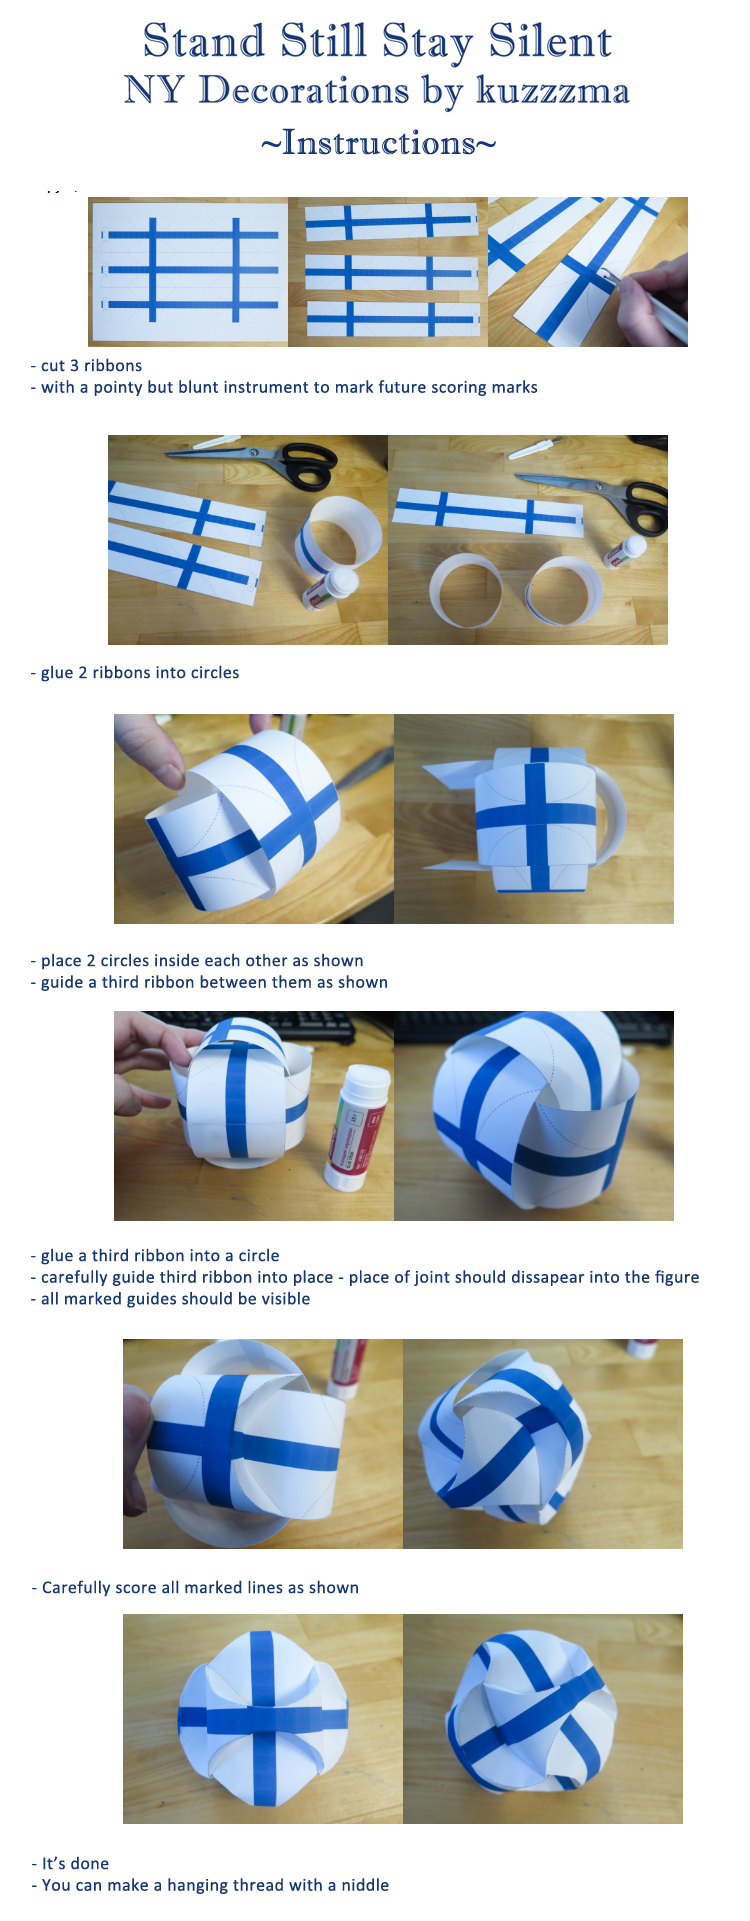 Stand Still Stay Silent NY decorations: Nordic Flags decorations how-to